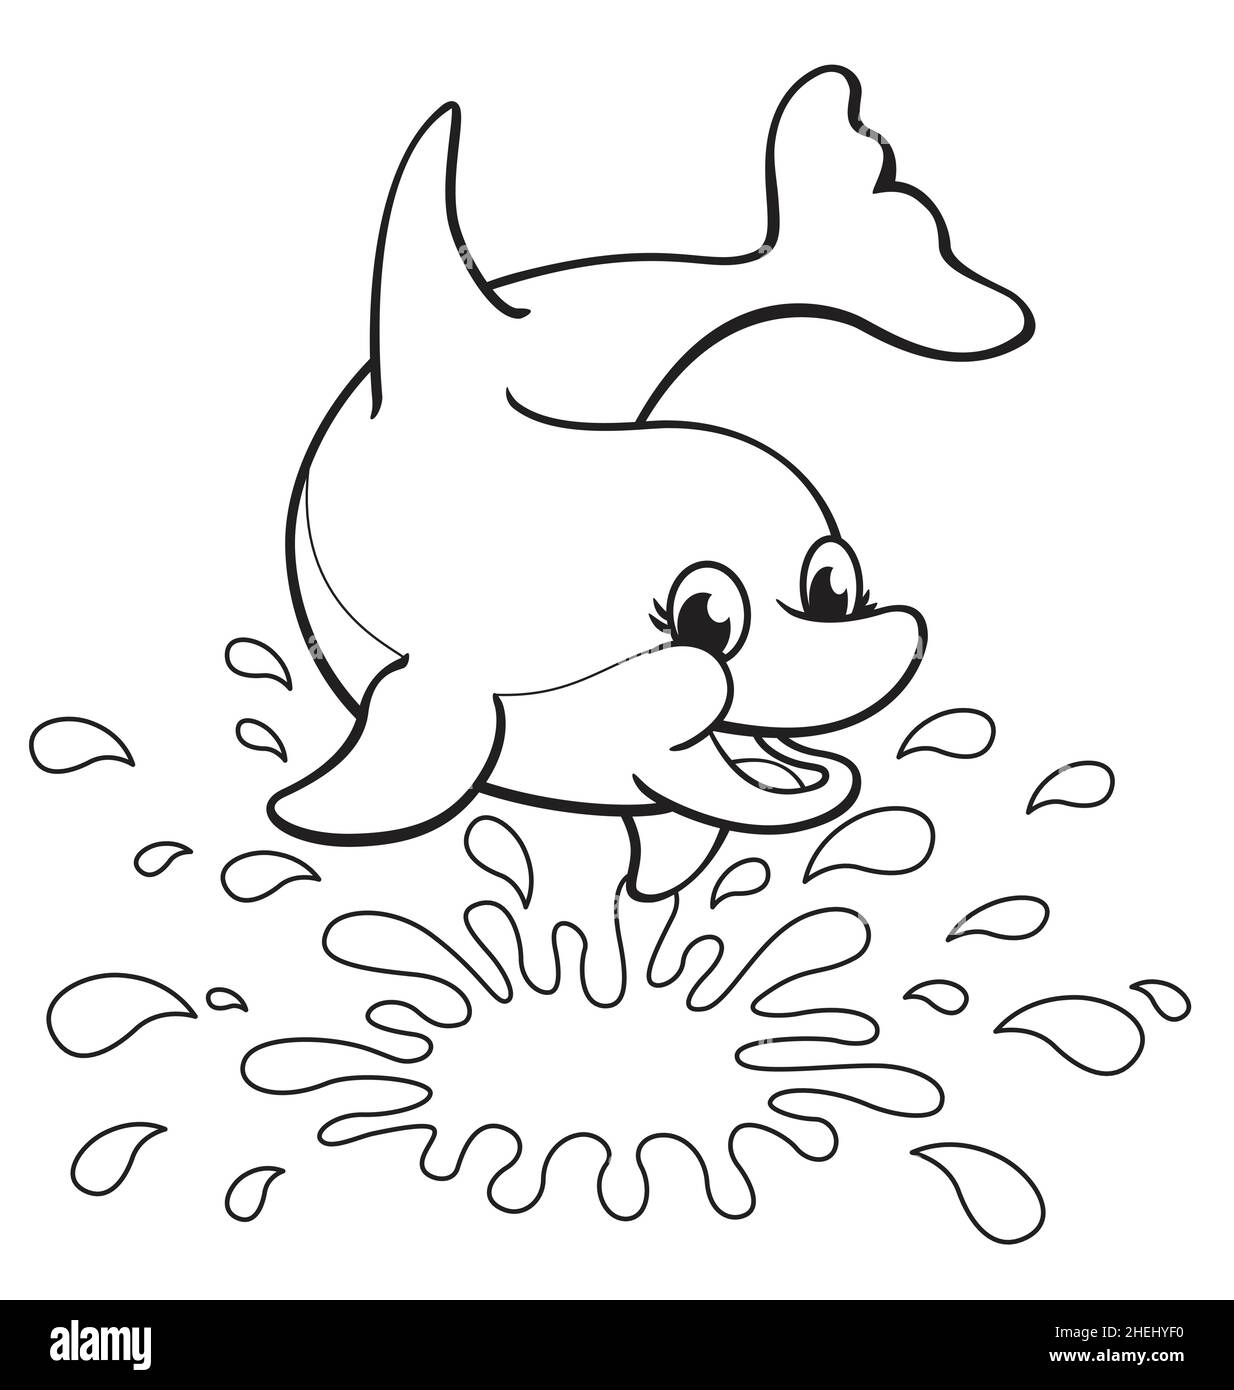 fun happy cute dolphin with splash for coloring colouring in activity book image isolated on white background Stock Vector